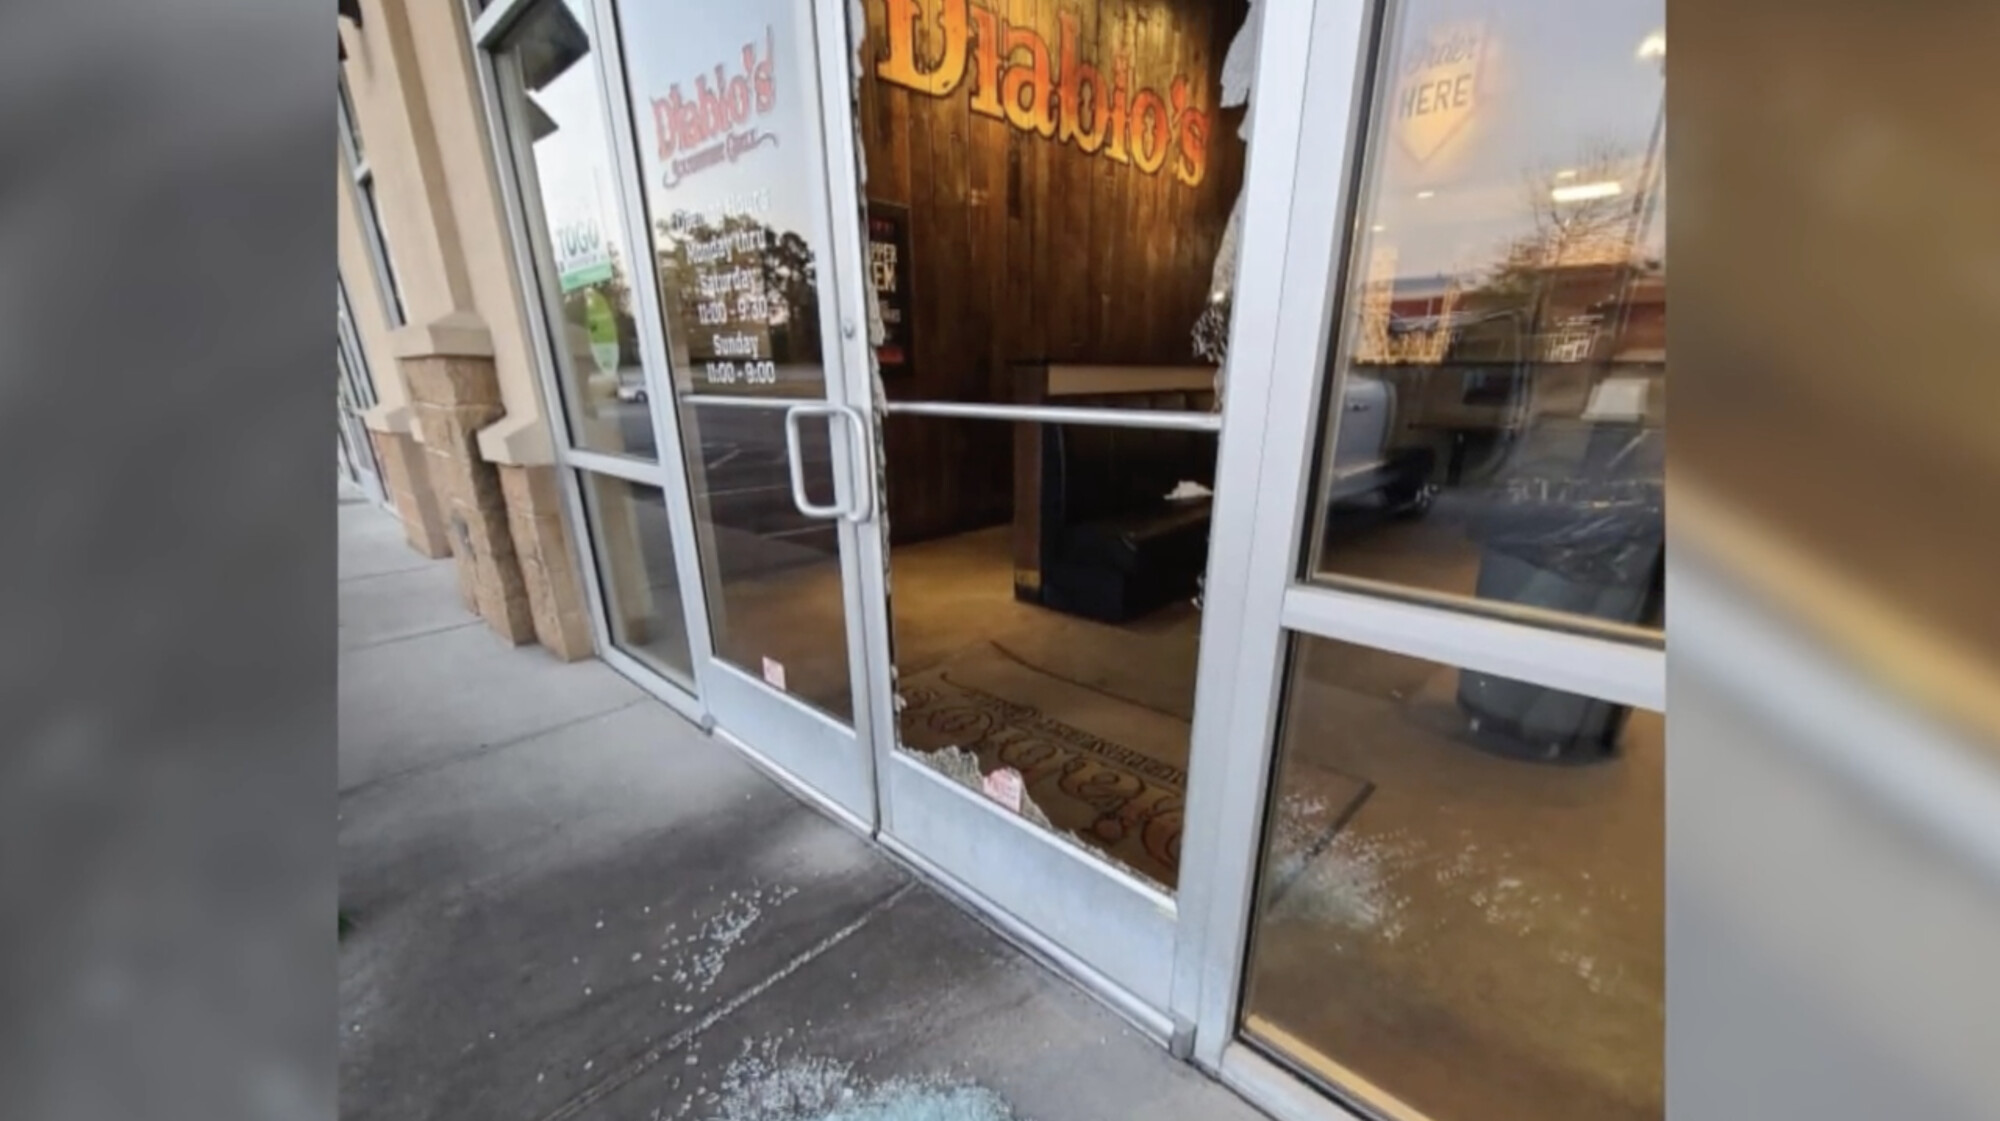 Smash-And-Grab Takes Millions in Merchandise